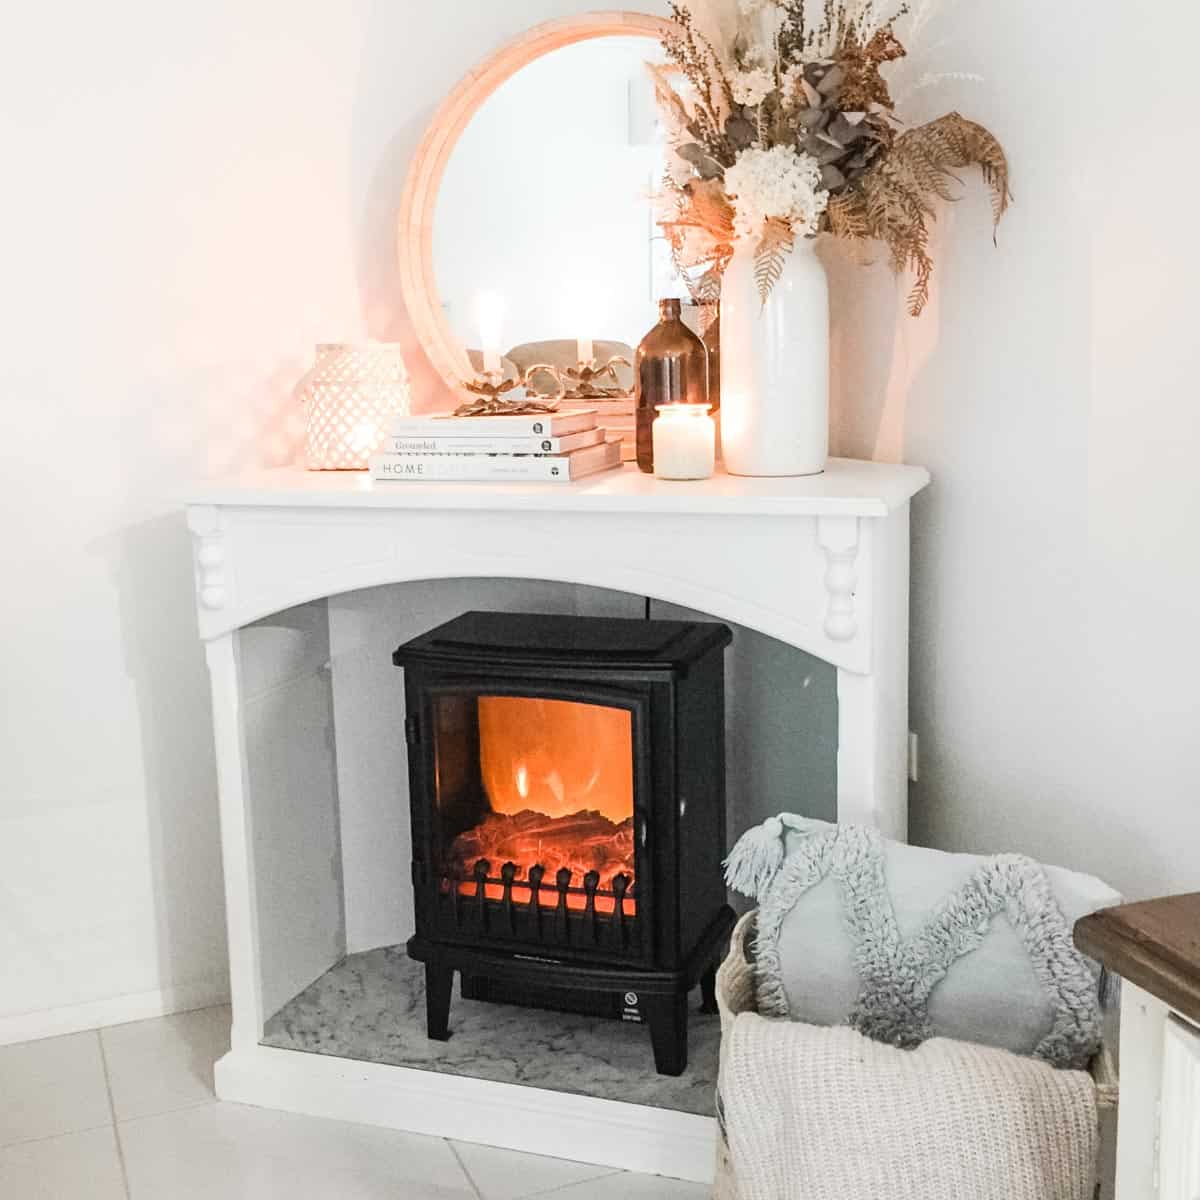 Image of a black faux fireplace hater in a white cabinet next to a basket with a cushion and throw rug and decorated with a round mirror, books, lantern candle and vase with dried florals